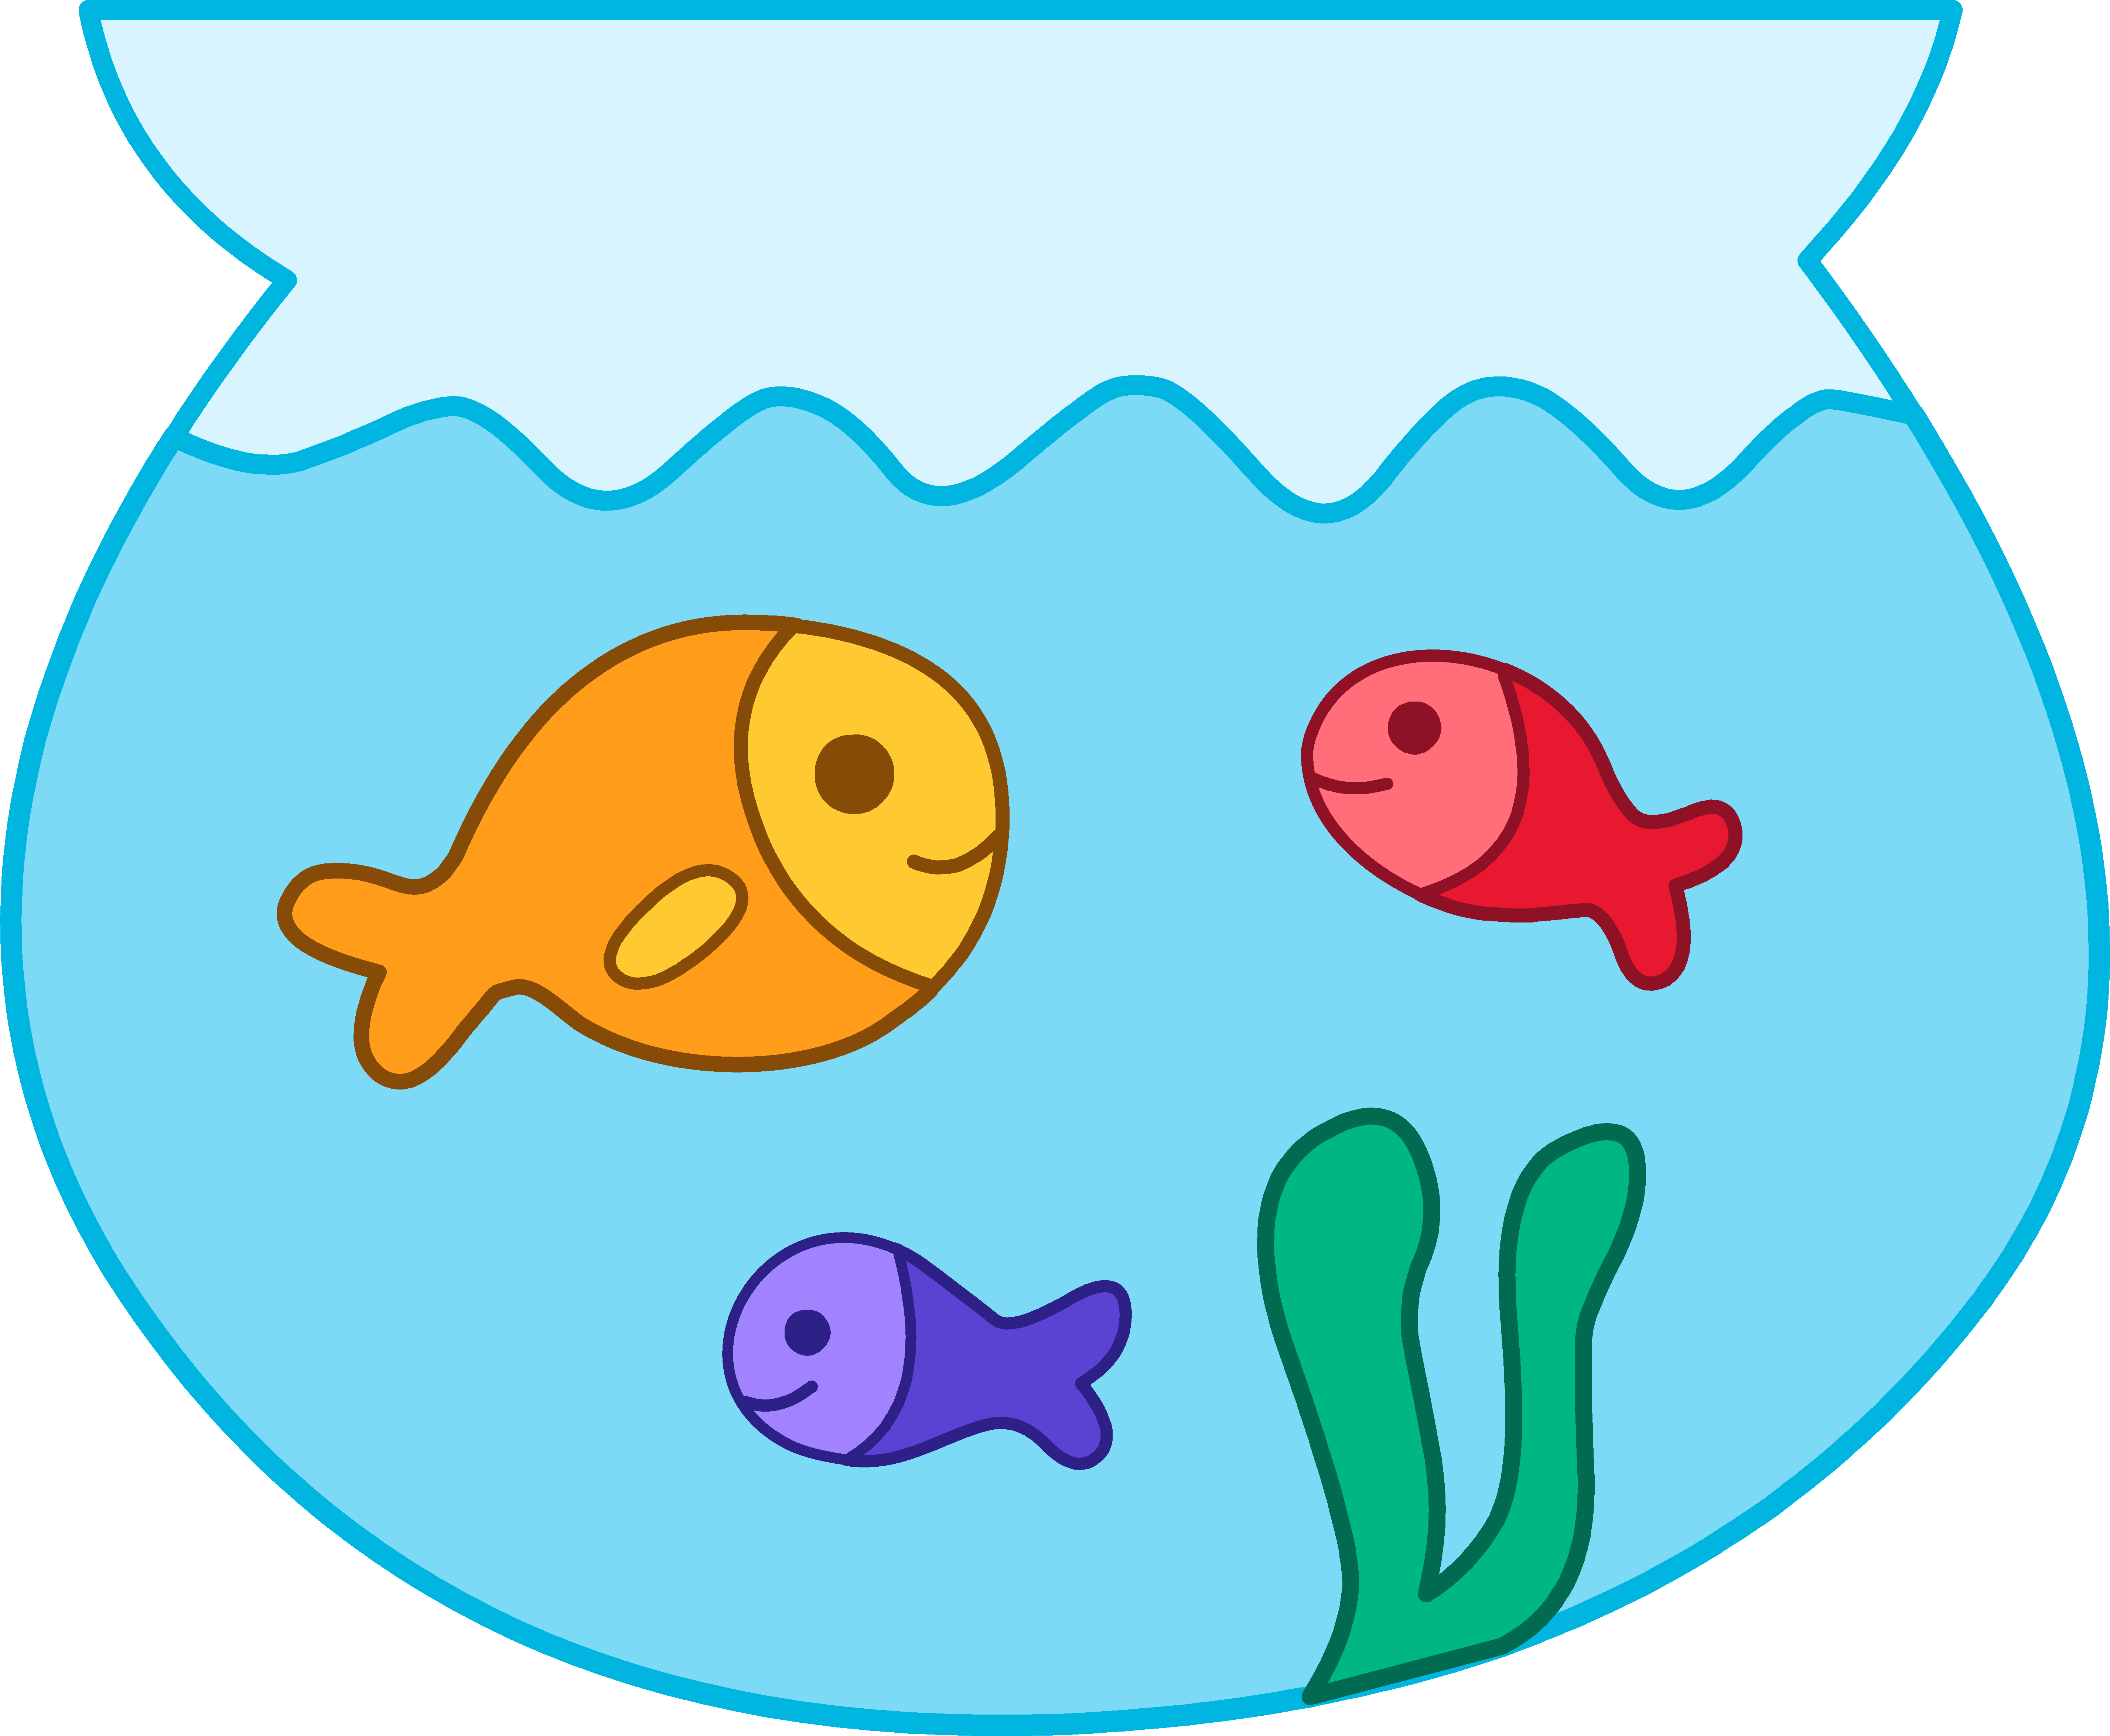 Free Fishbowl Cliparts, Download Free Clip Art, Free Clip.